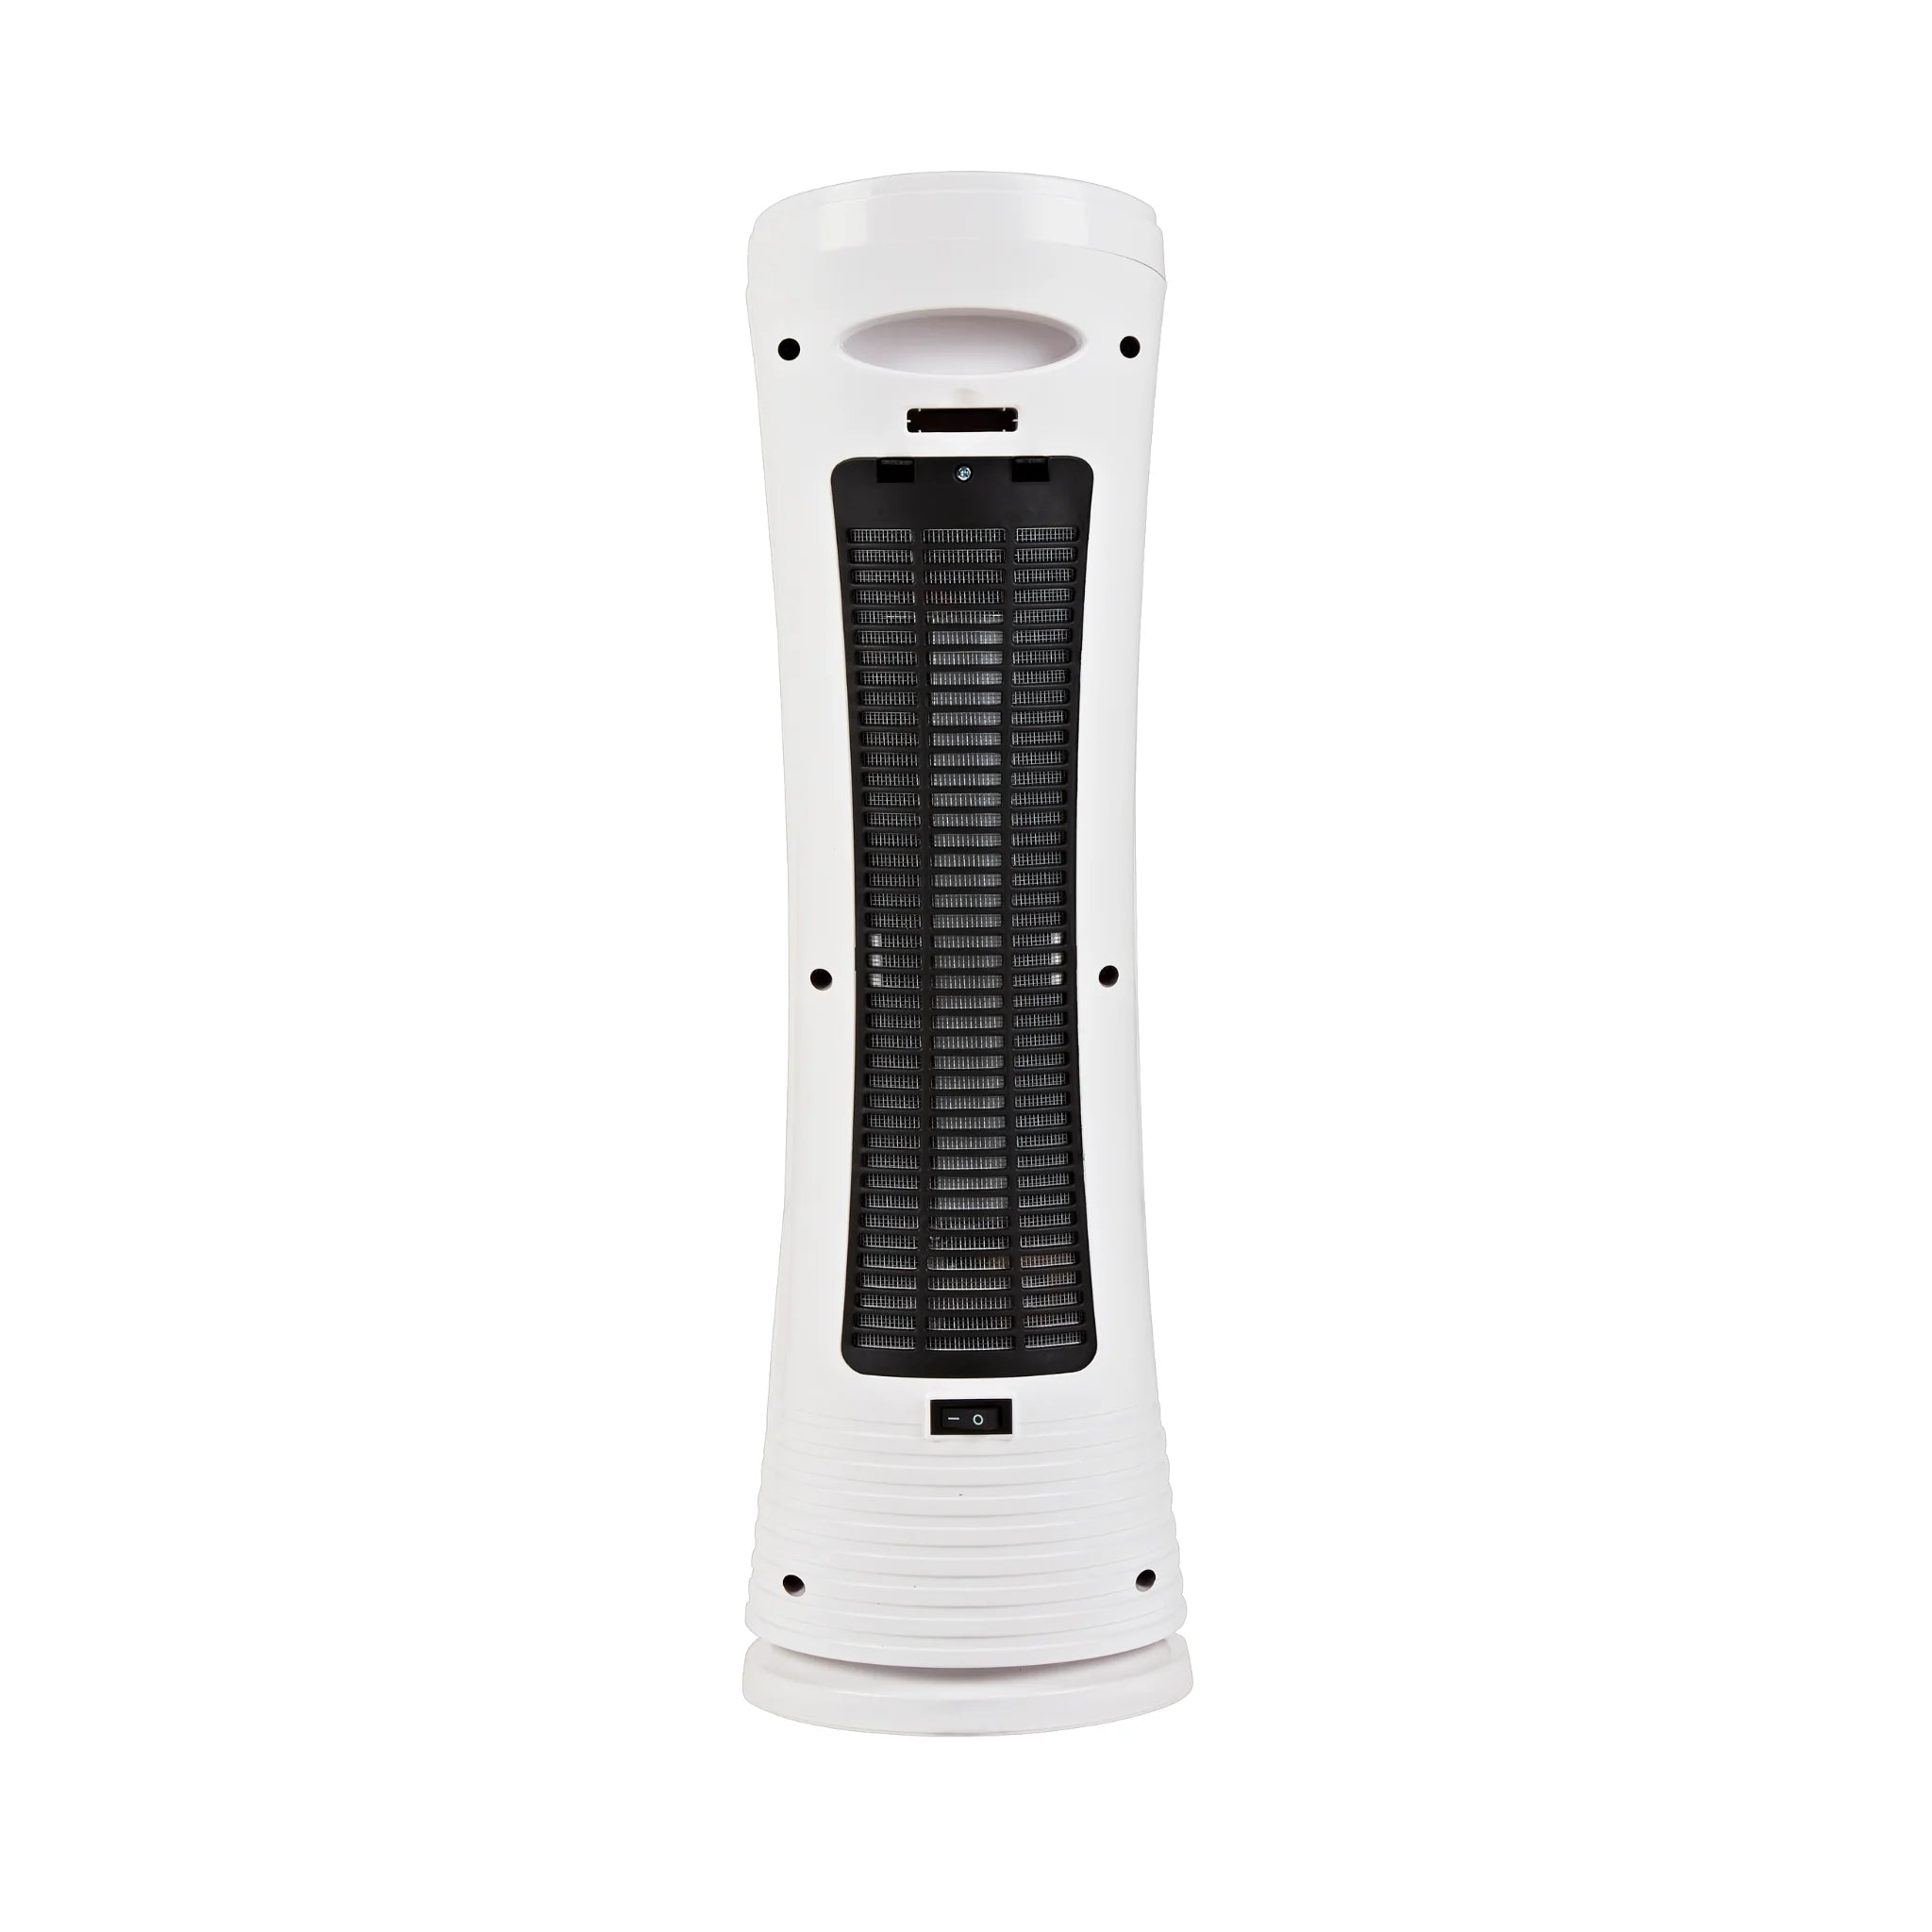 Senelux 2000W Tower Fan back image showing the simple, energy efficient on/off switch at the bottom and remote holder at top.